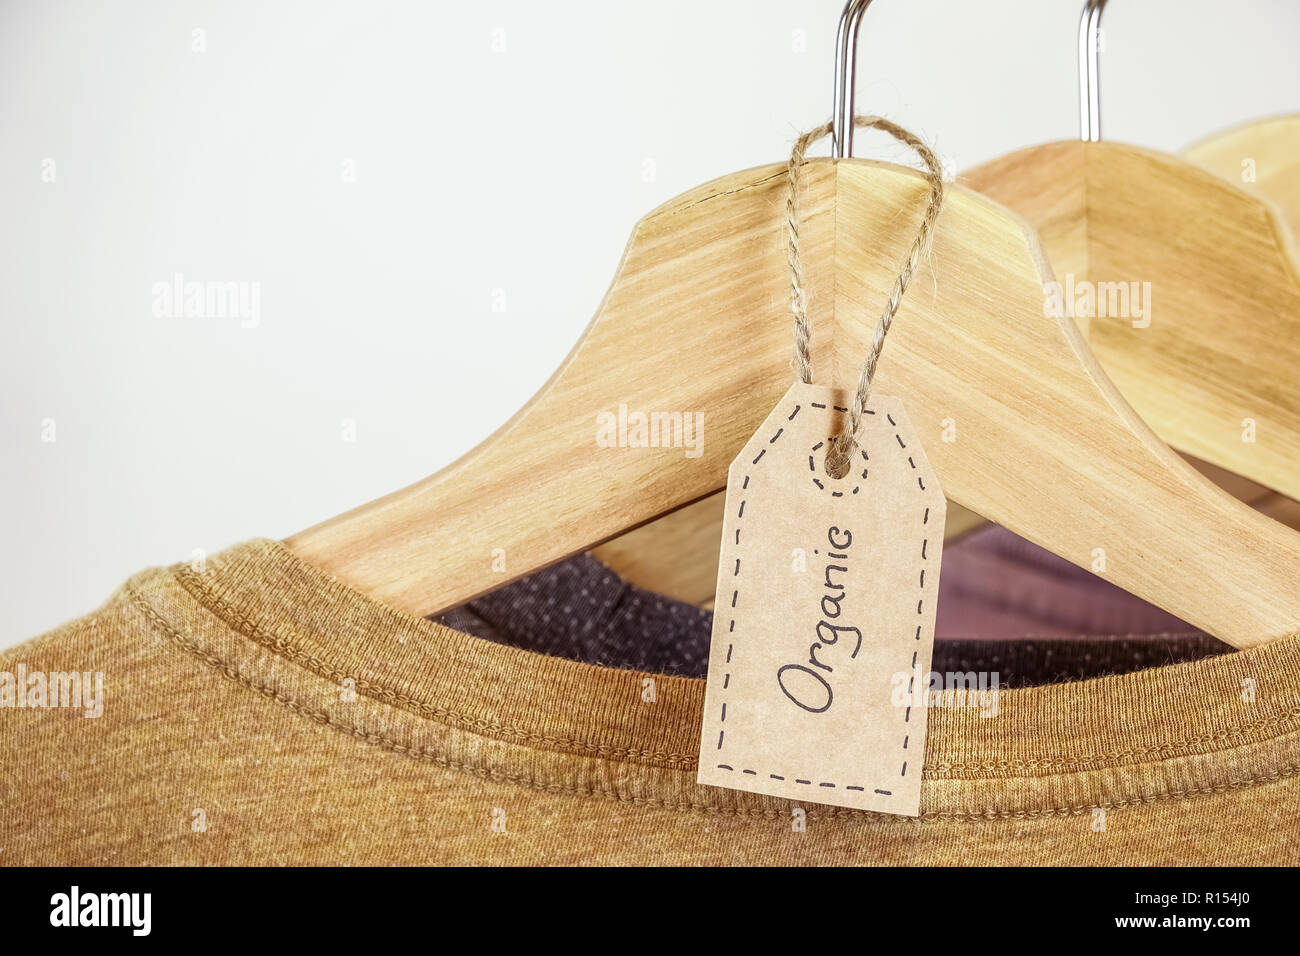 Organic clothes. Natural colored t-shirts hanging on wooden hangers in a row. Stock Photo